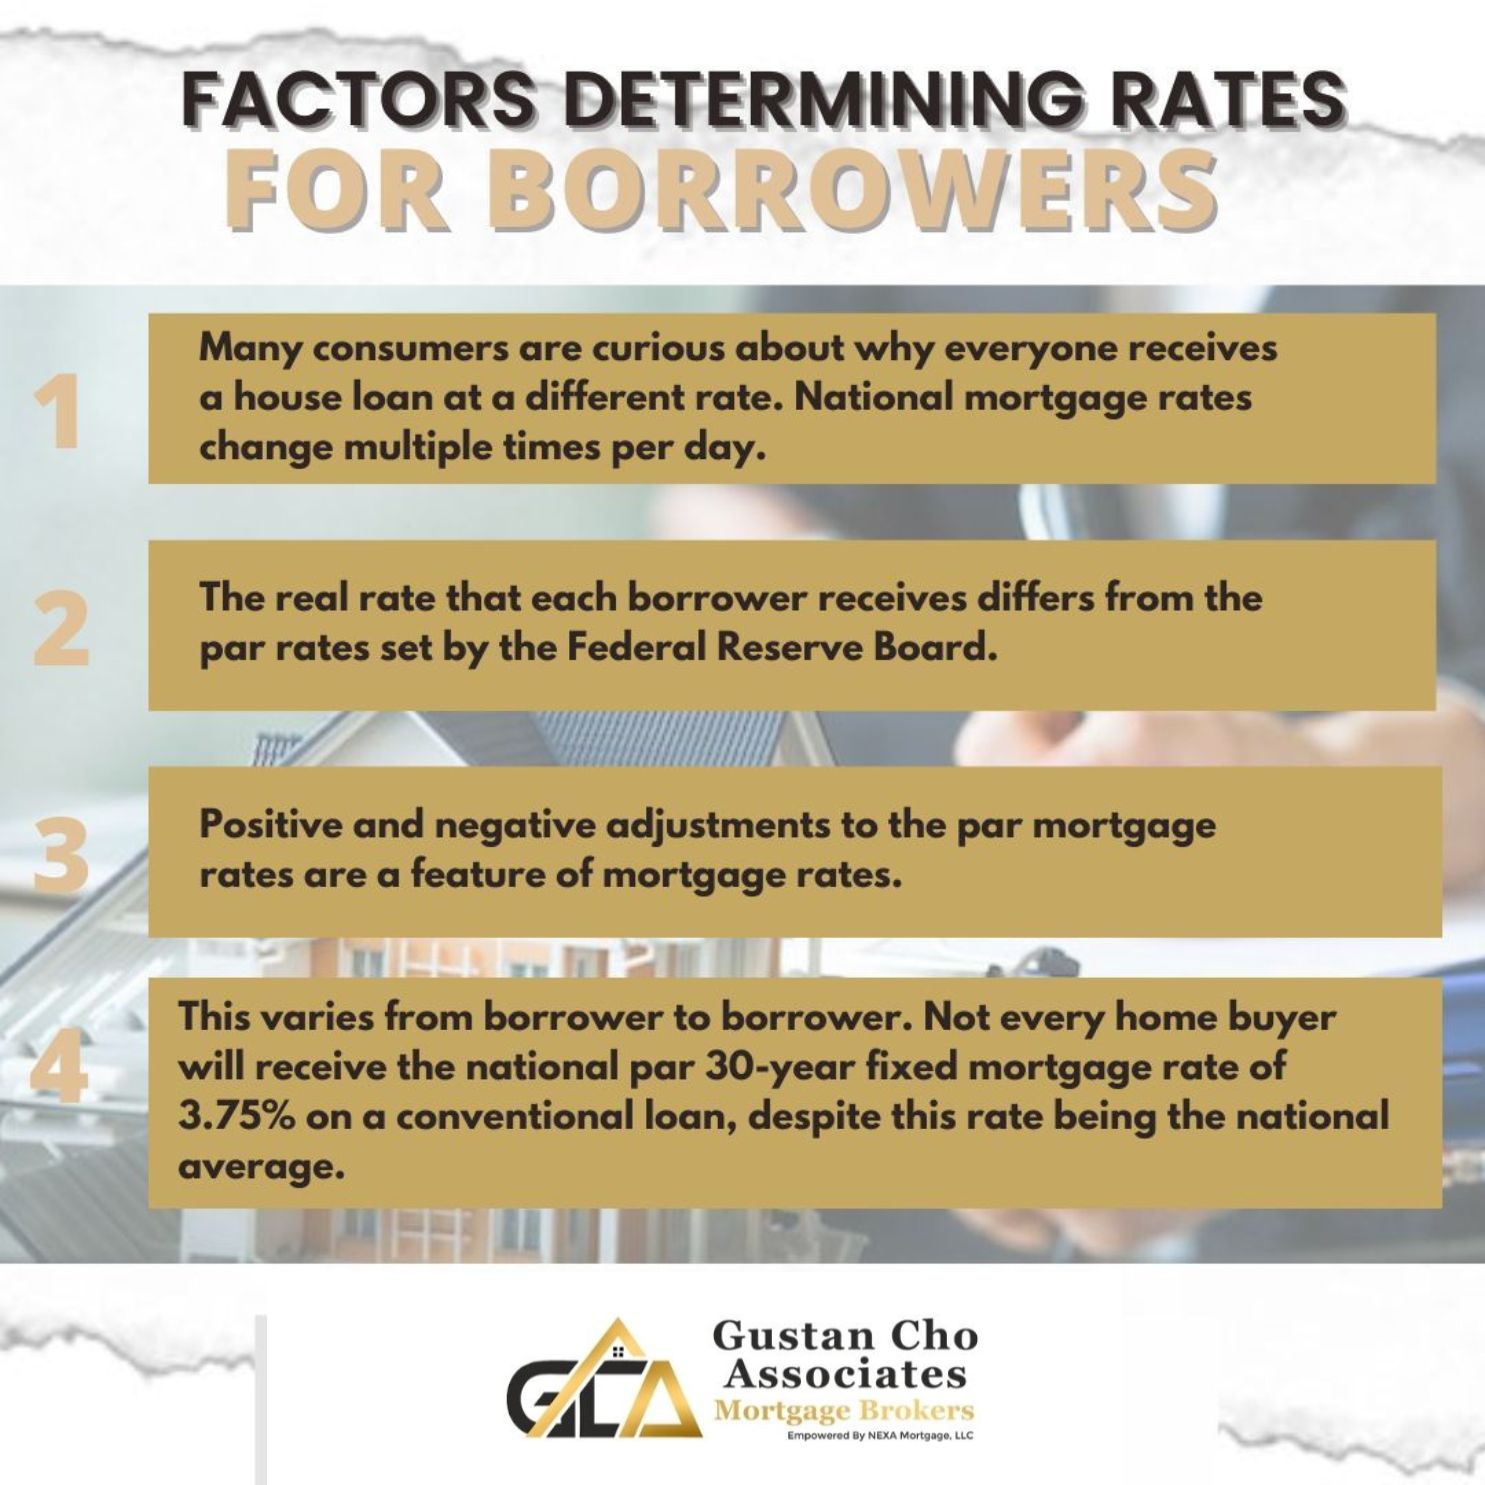 What Factors Affect Mortgage Rates for Borrowers